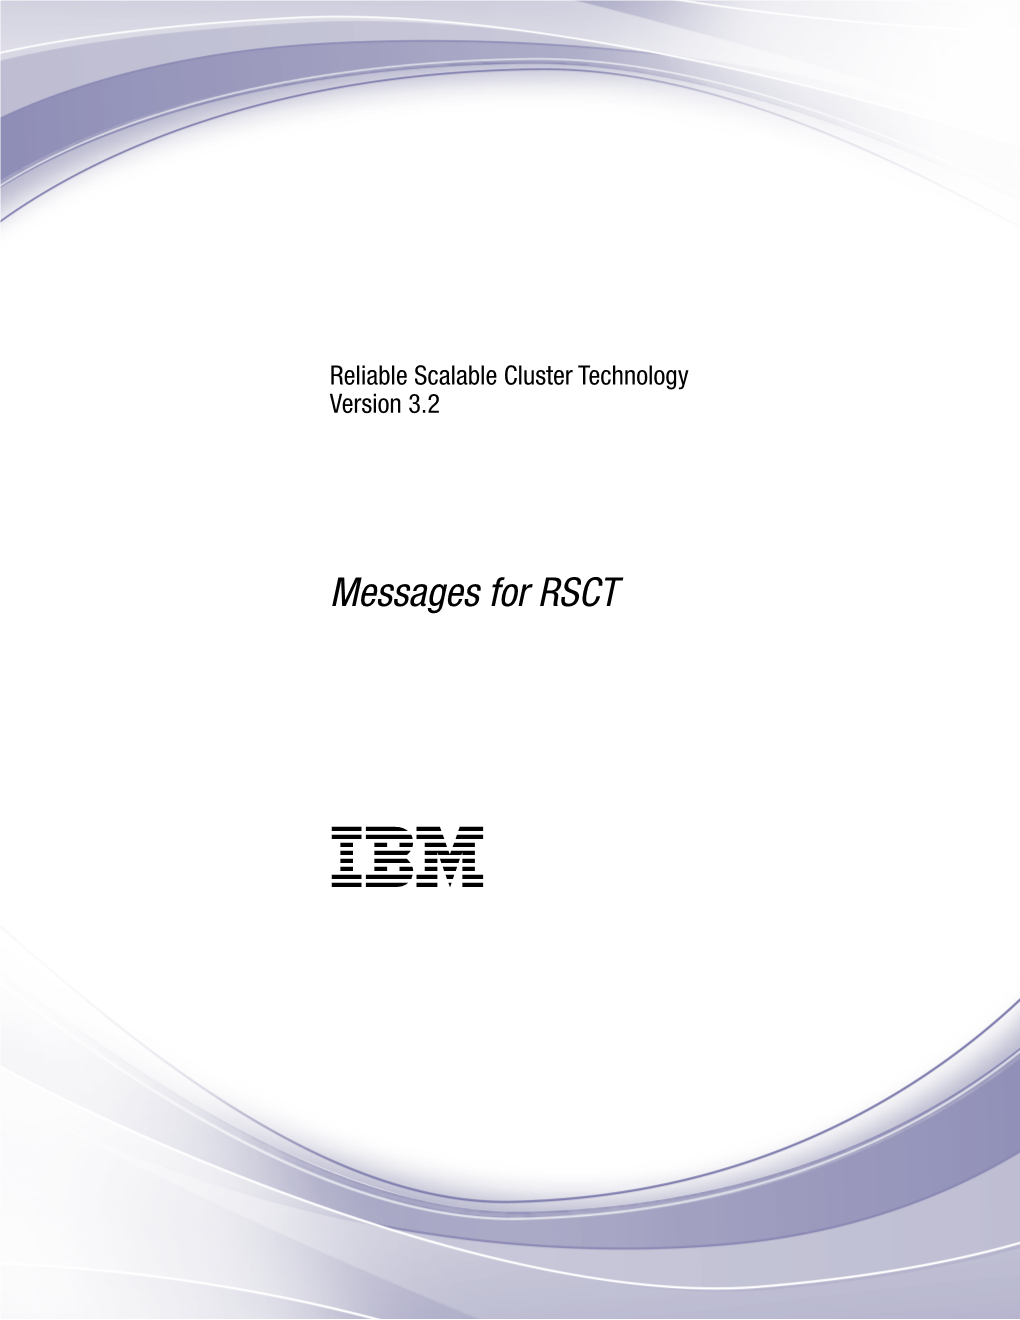 Reliable Scalable Cluster Technology Version 3.2: Messages for RSCT About This Document